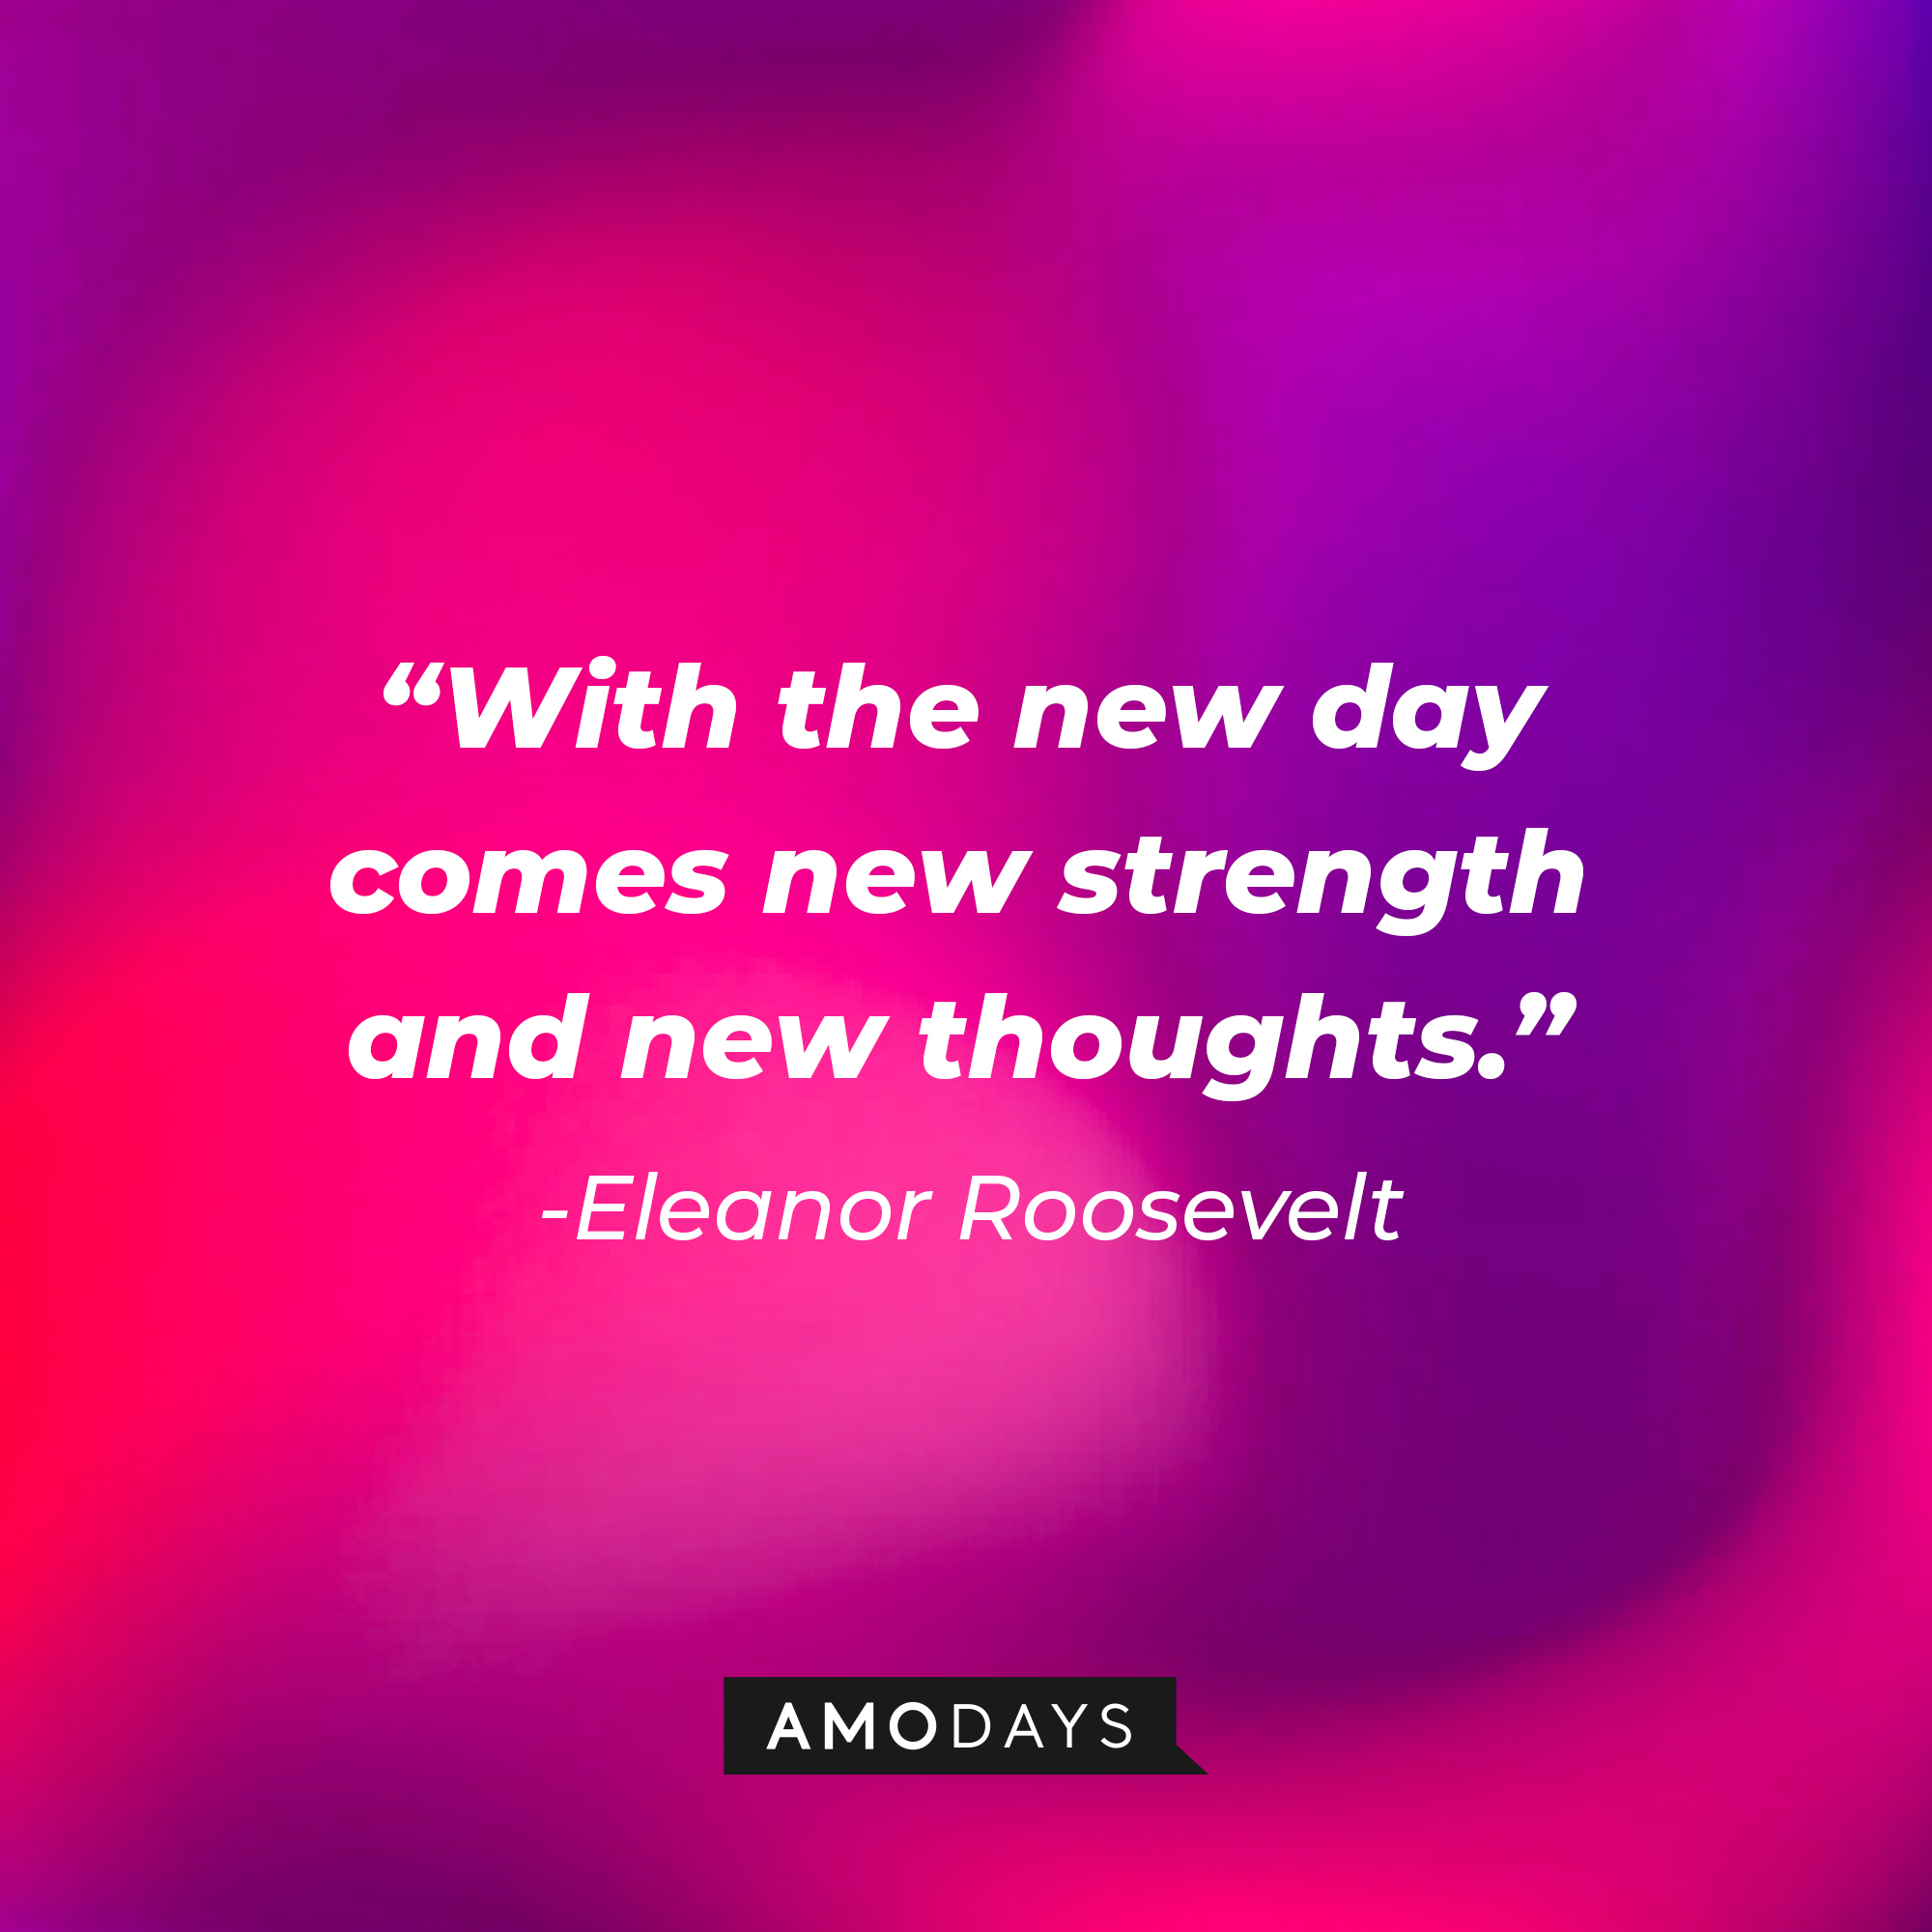 Eleanor Roosevelt’s quote: "With the new day comes new strength and new thoughts."   | Image: Amodays